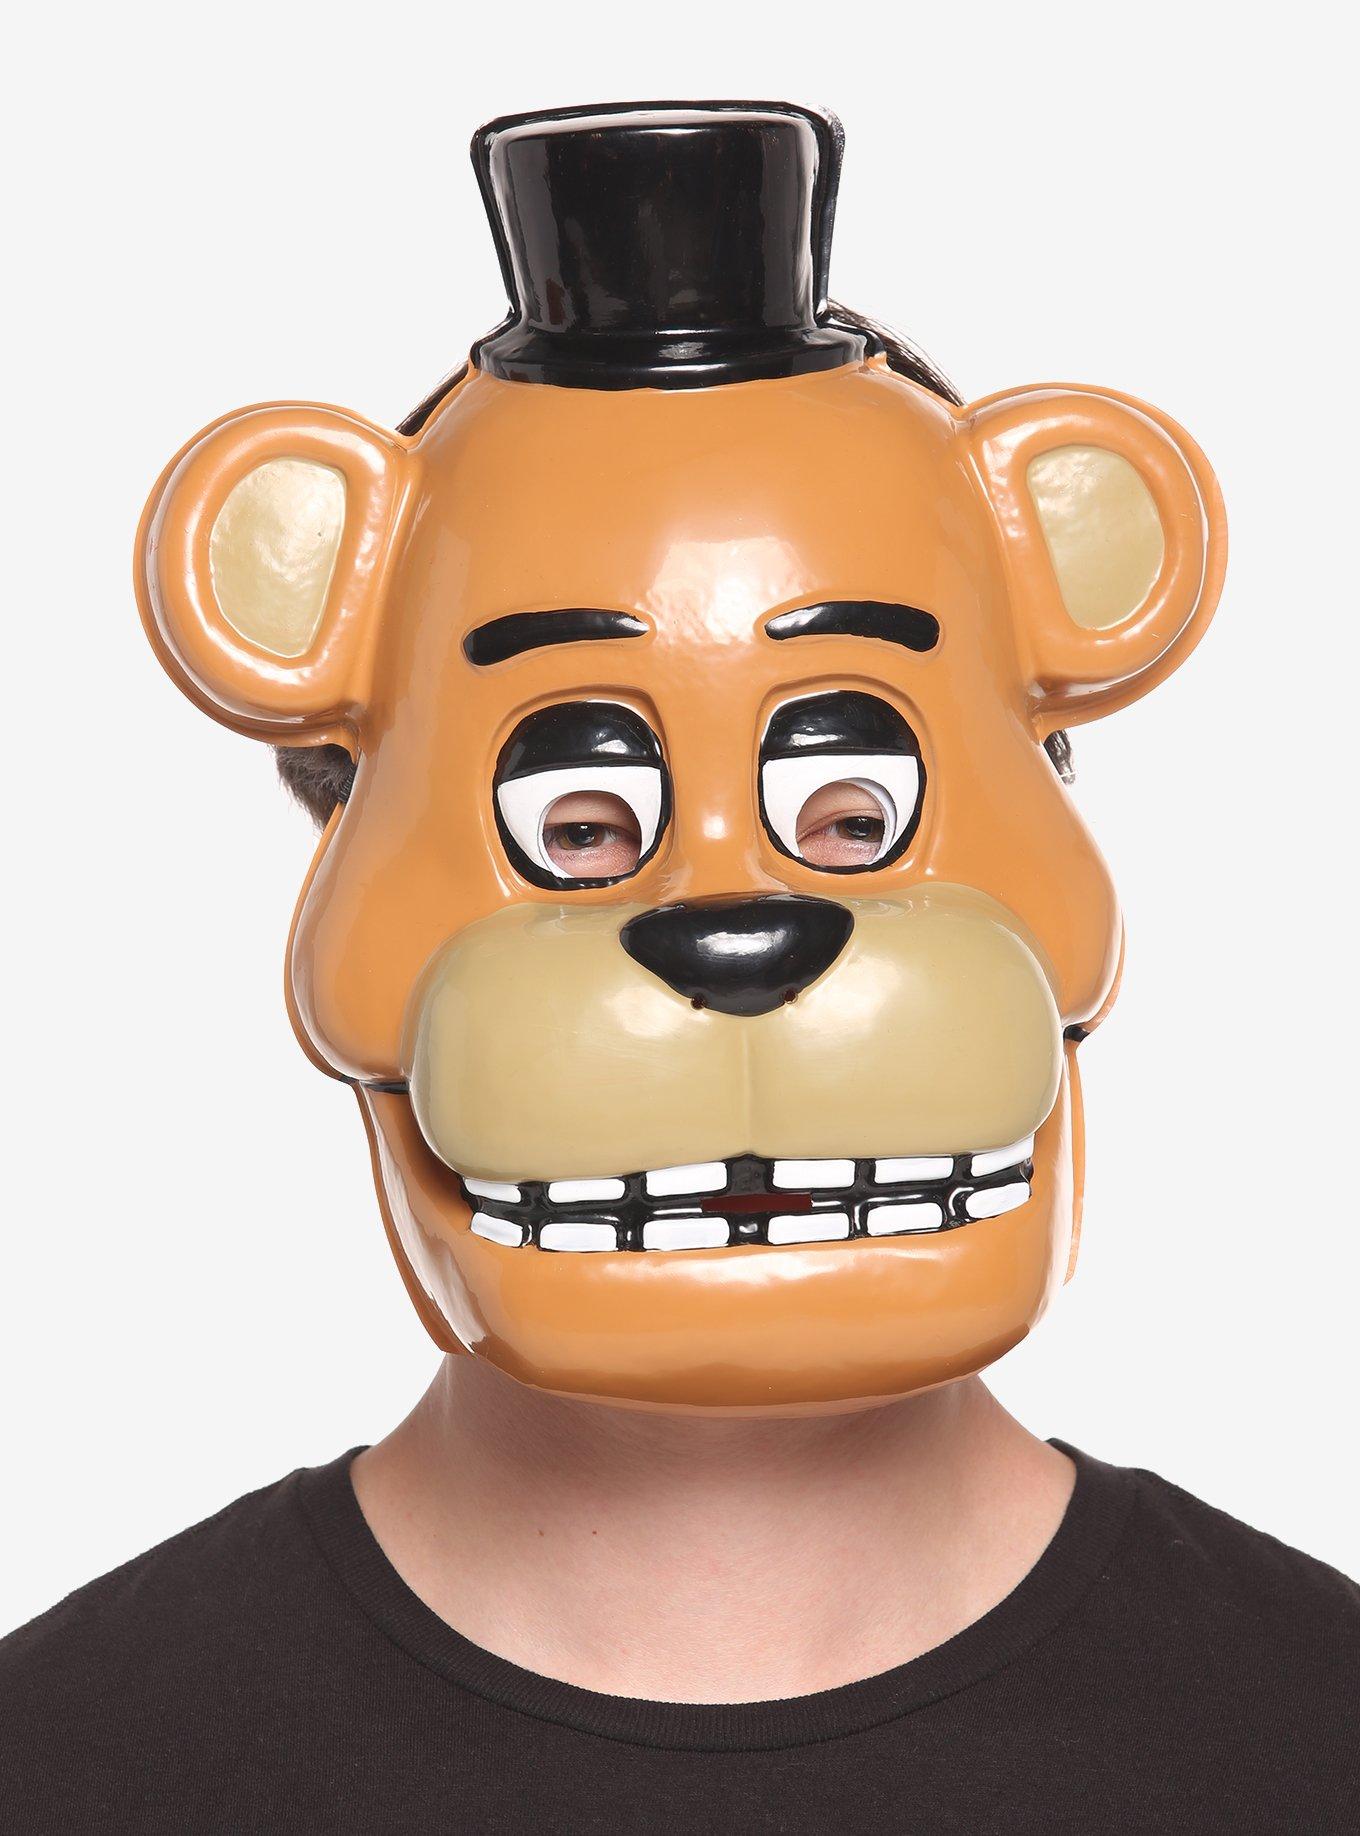 Adult's Five Nights At Freddy's Freddy 1/2 Mask